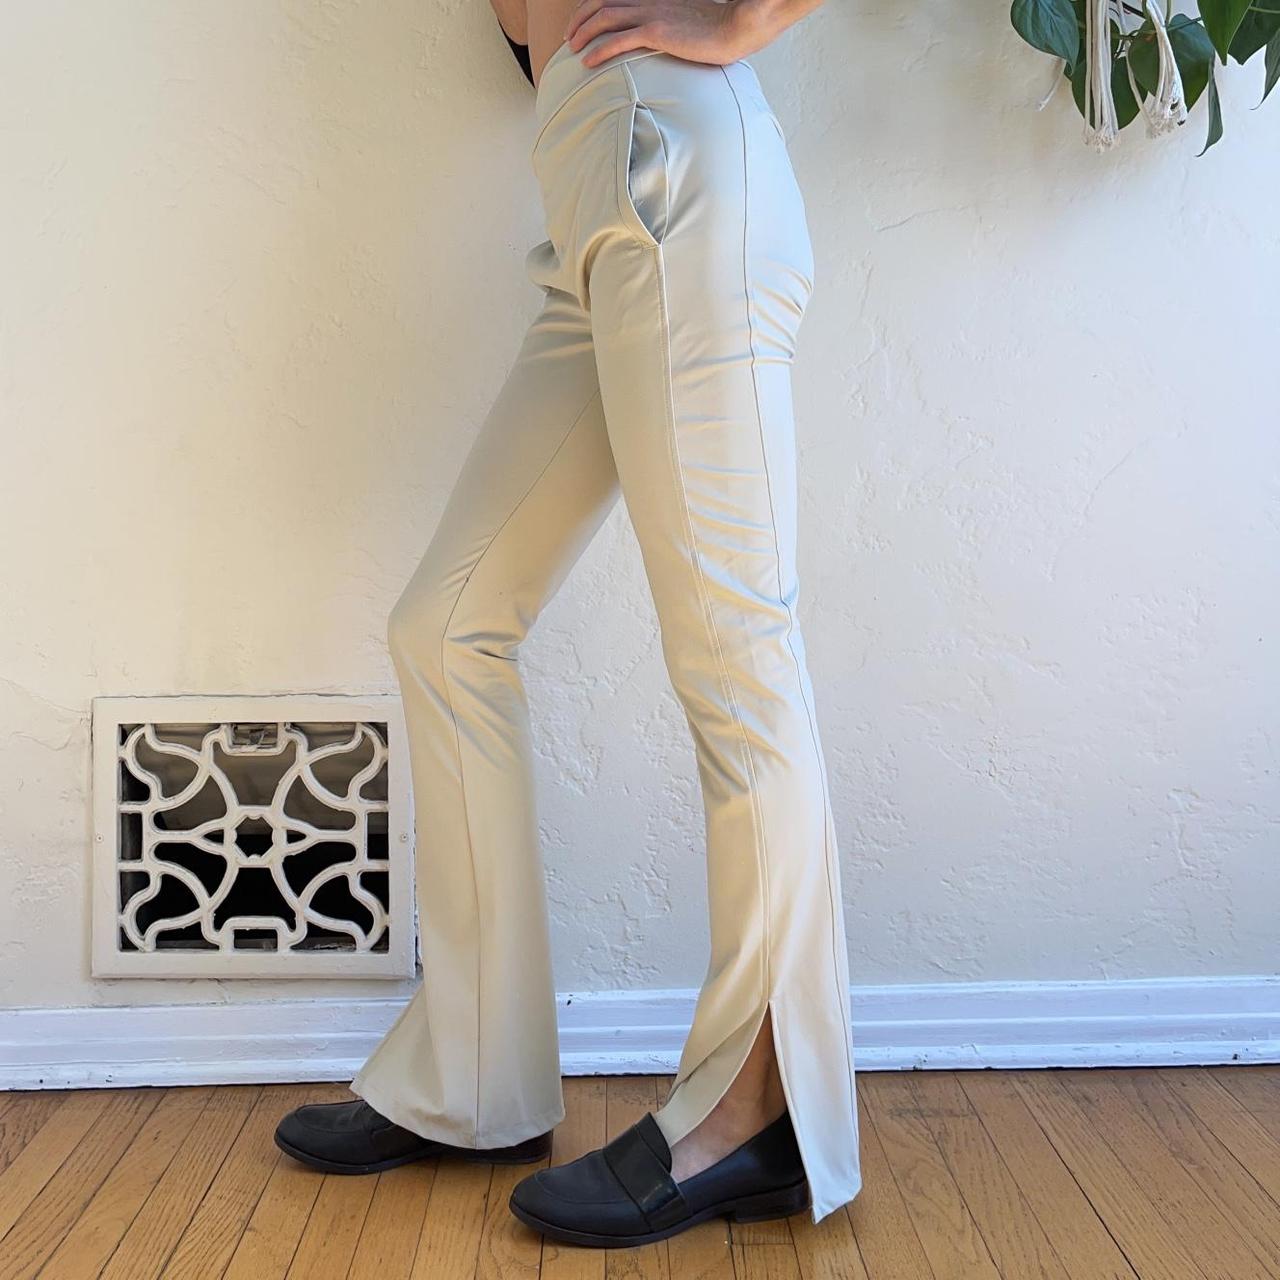 Kick Flare Stretch Pants in Khaki by Carbon38 from Carbon38